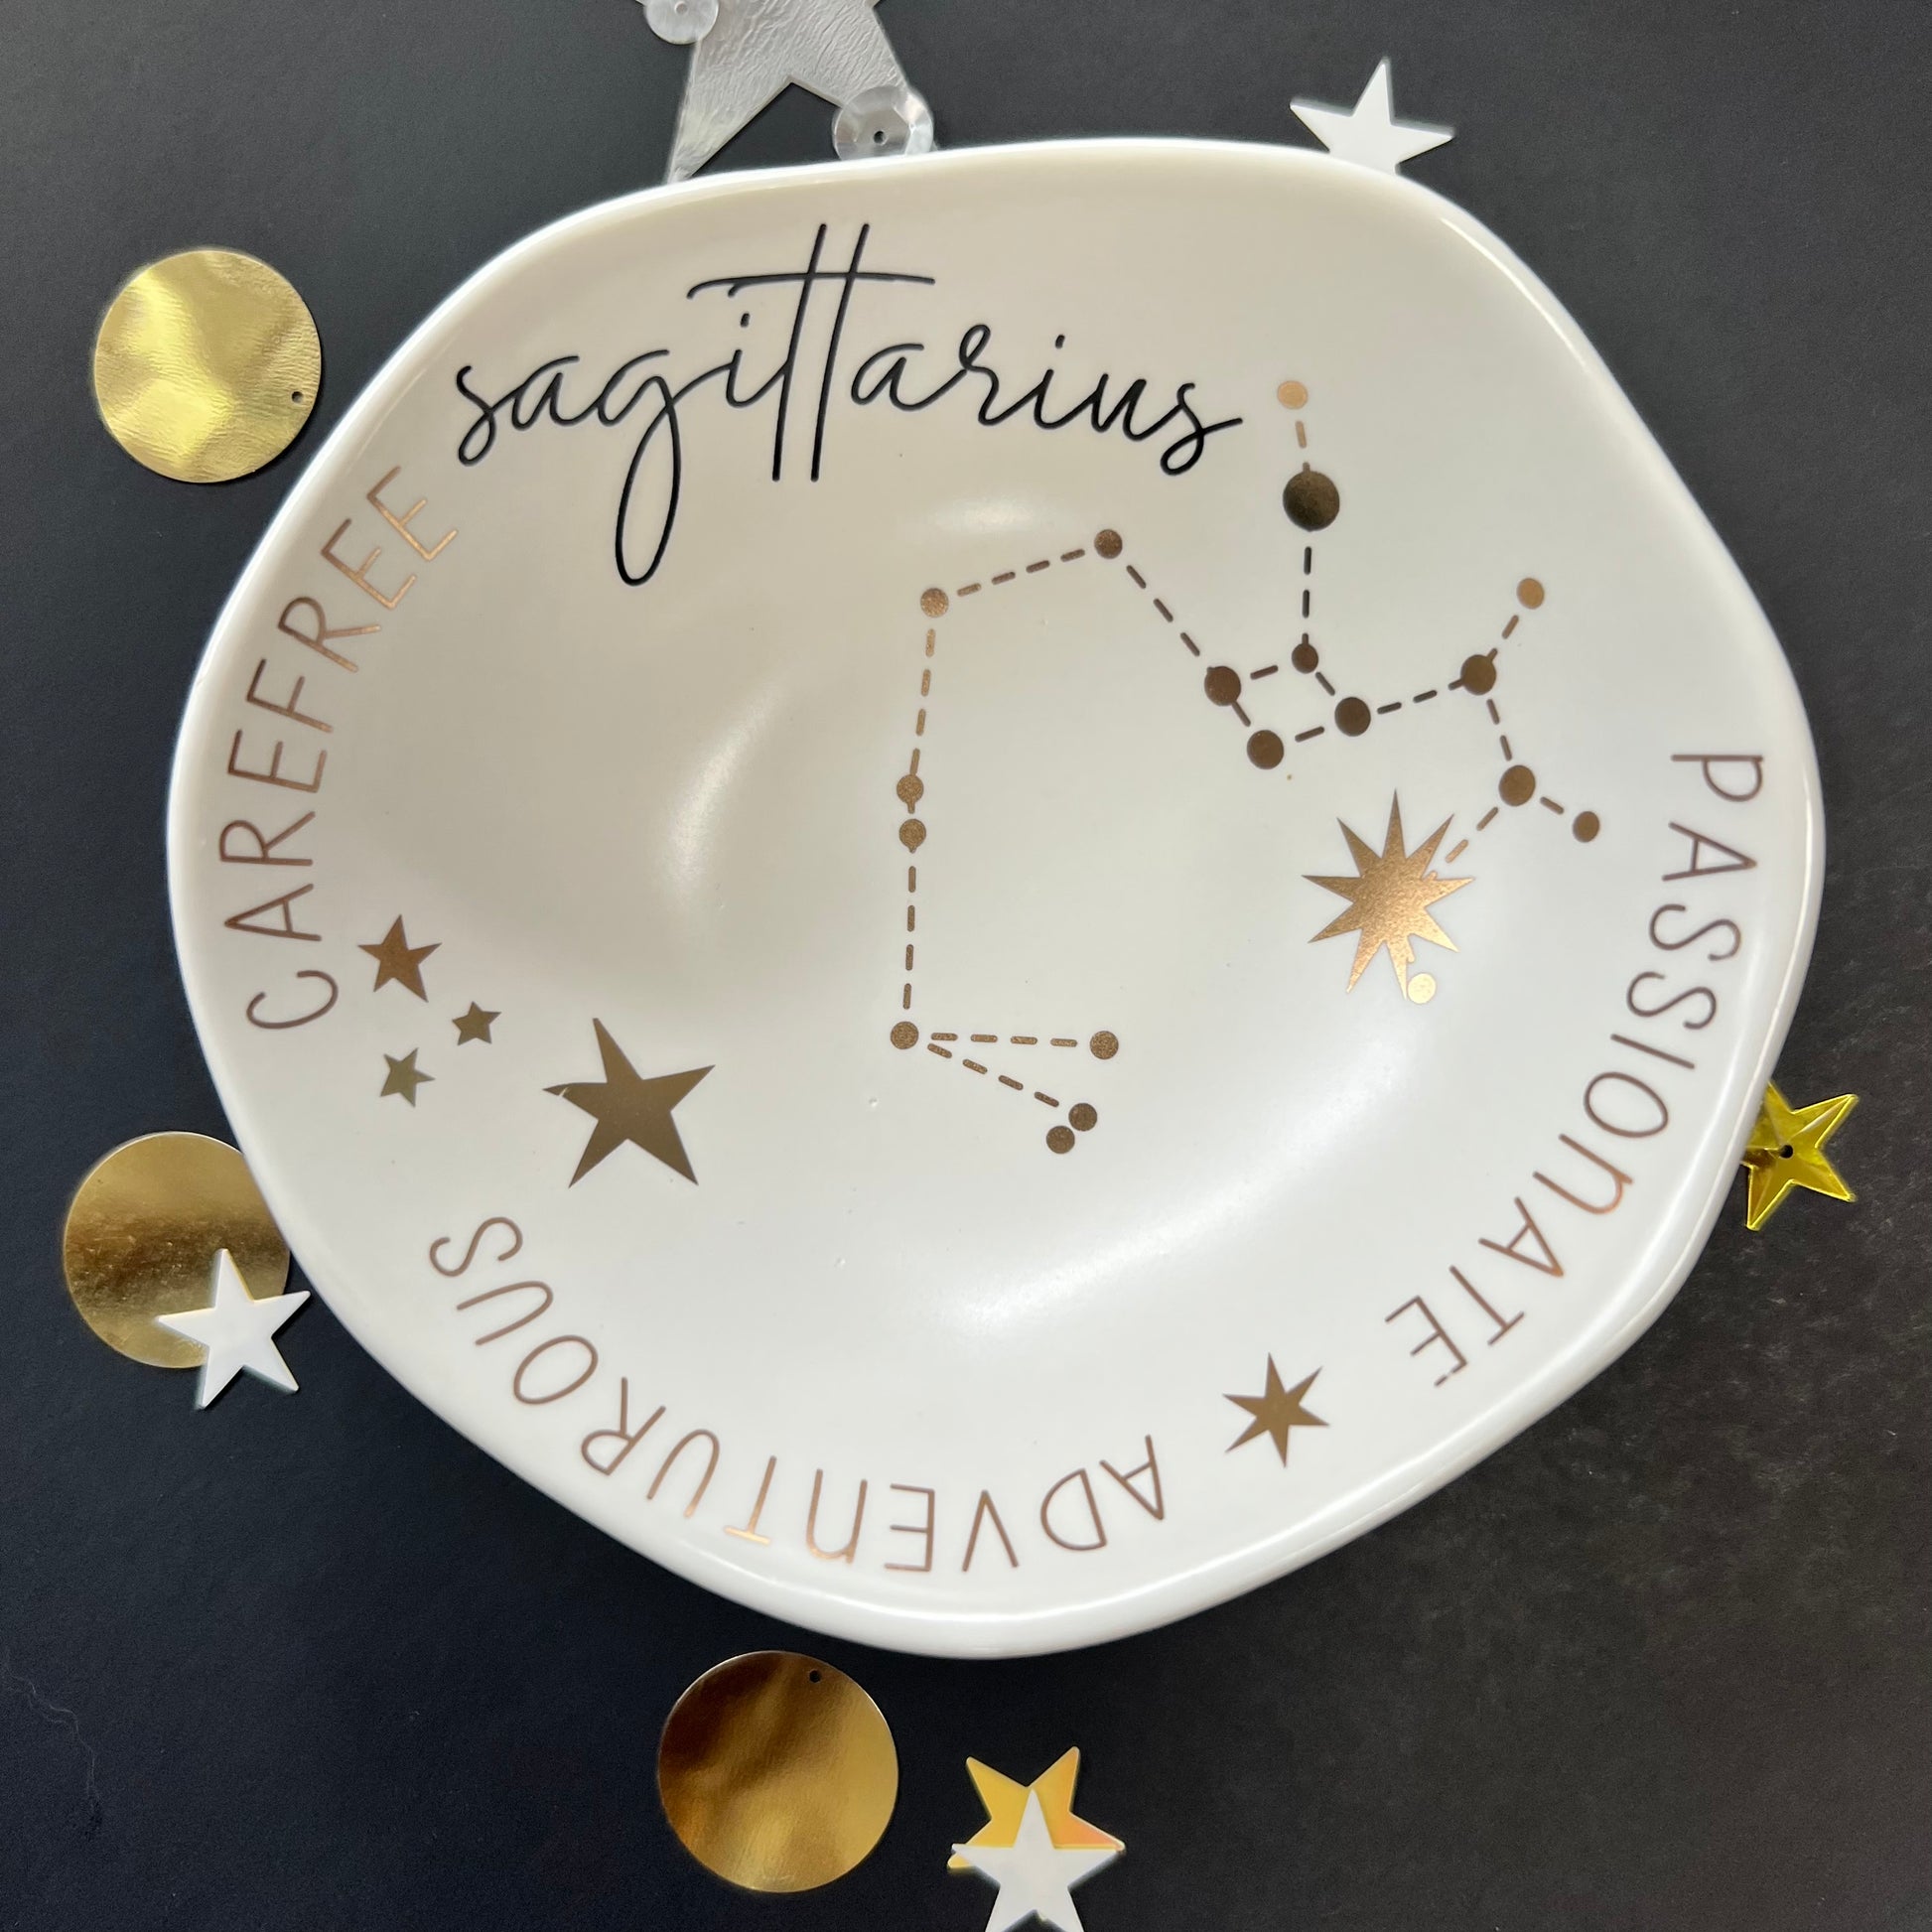 cream dish with gold stars and "Sagittarius Passionate Adventurous Carefree " around the inner rim on a black background with scattered stars and orbs.